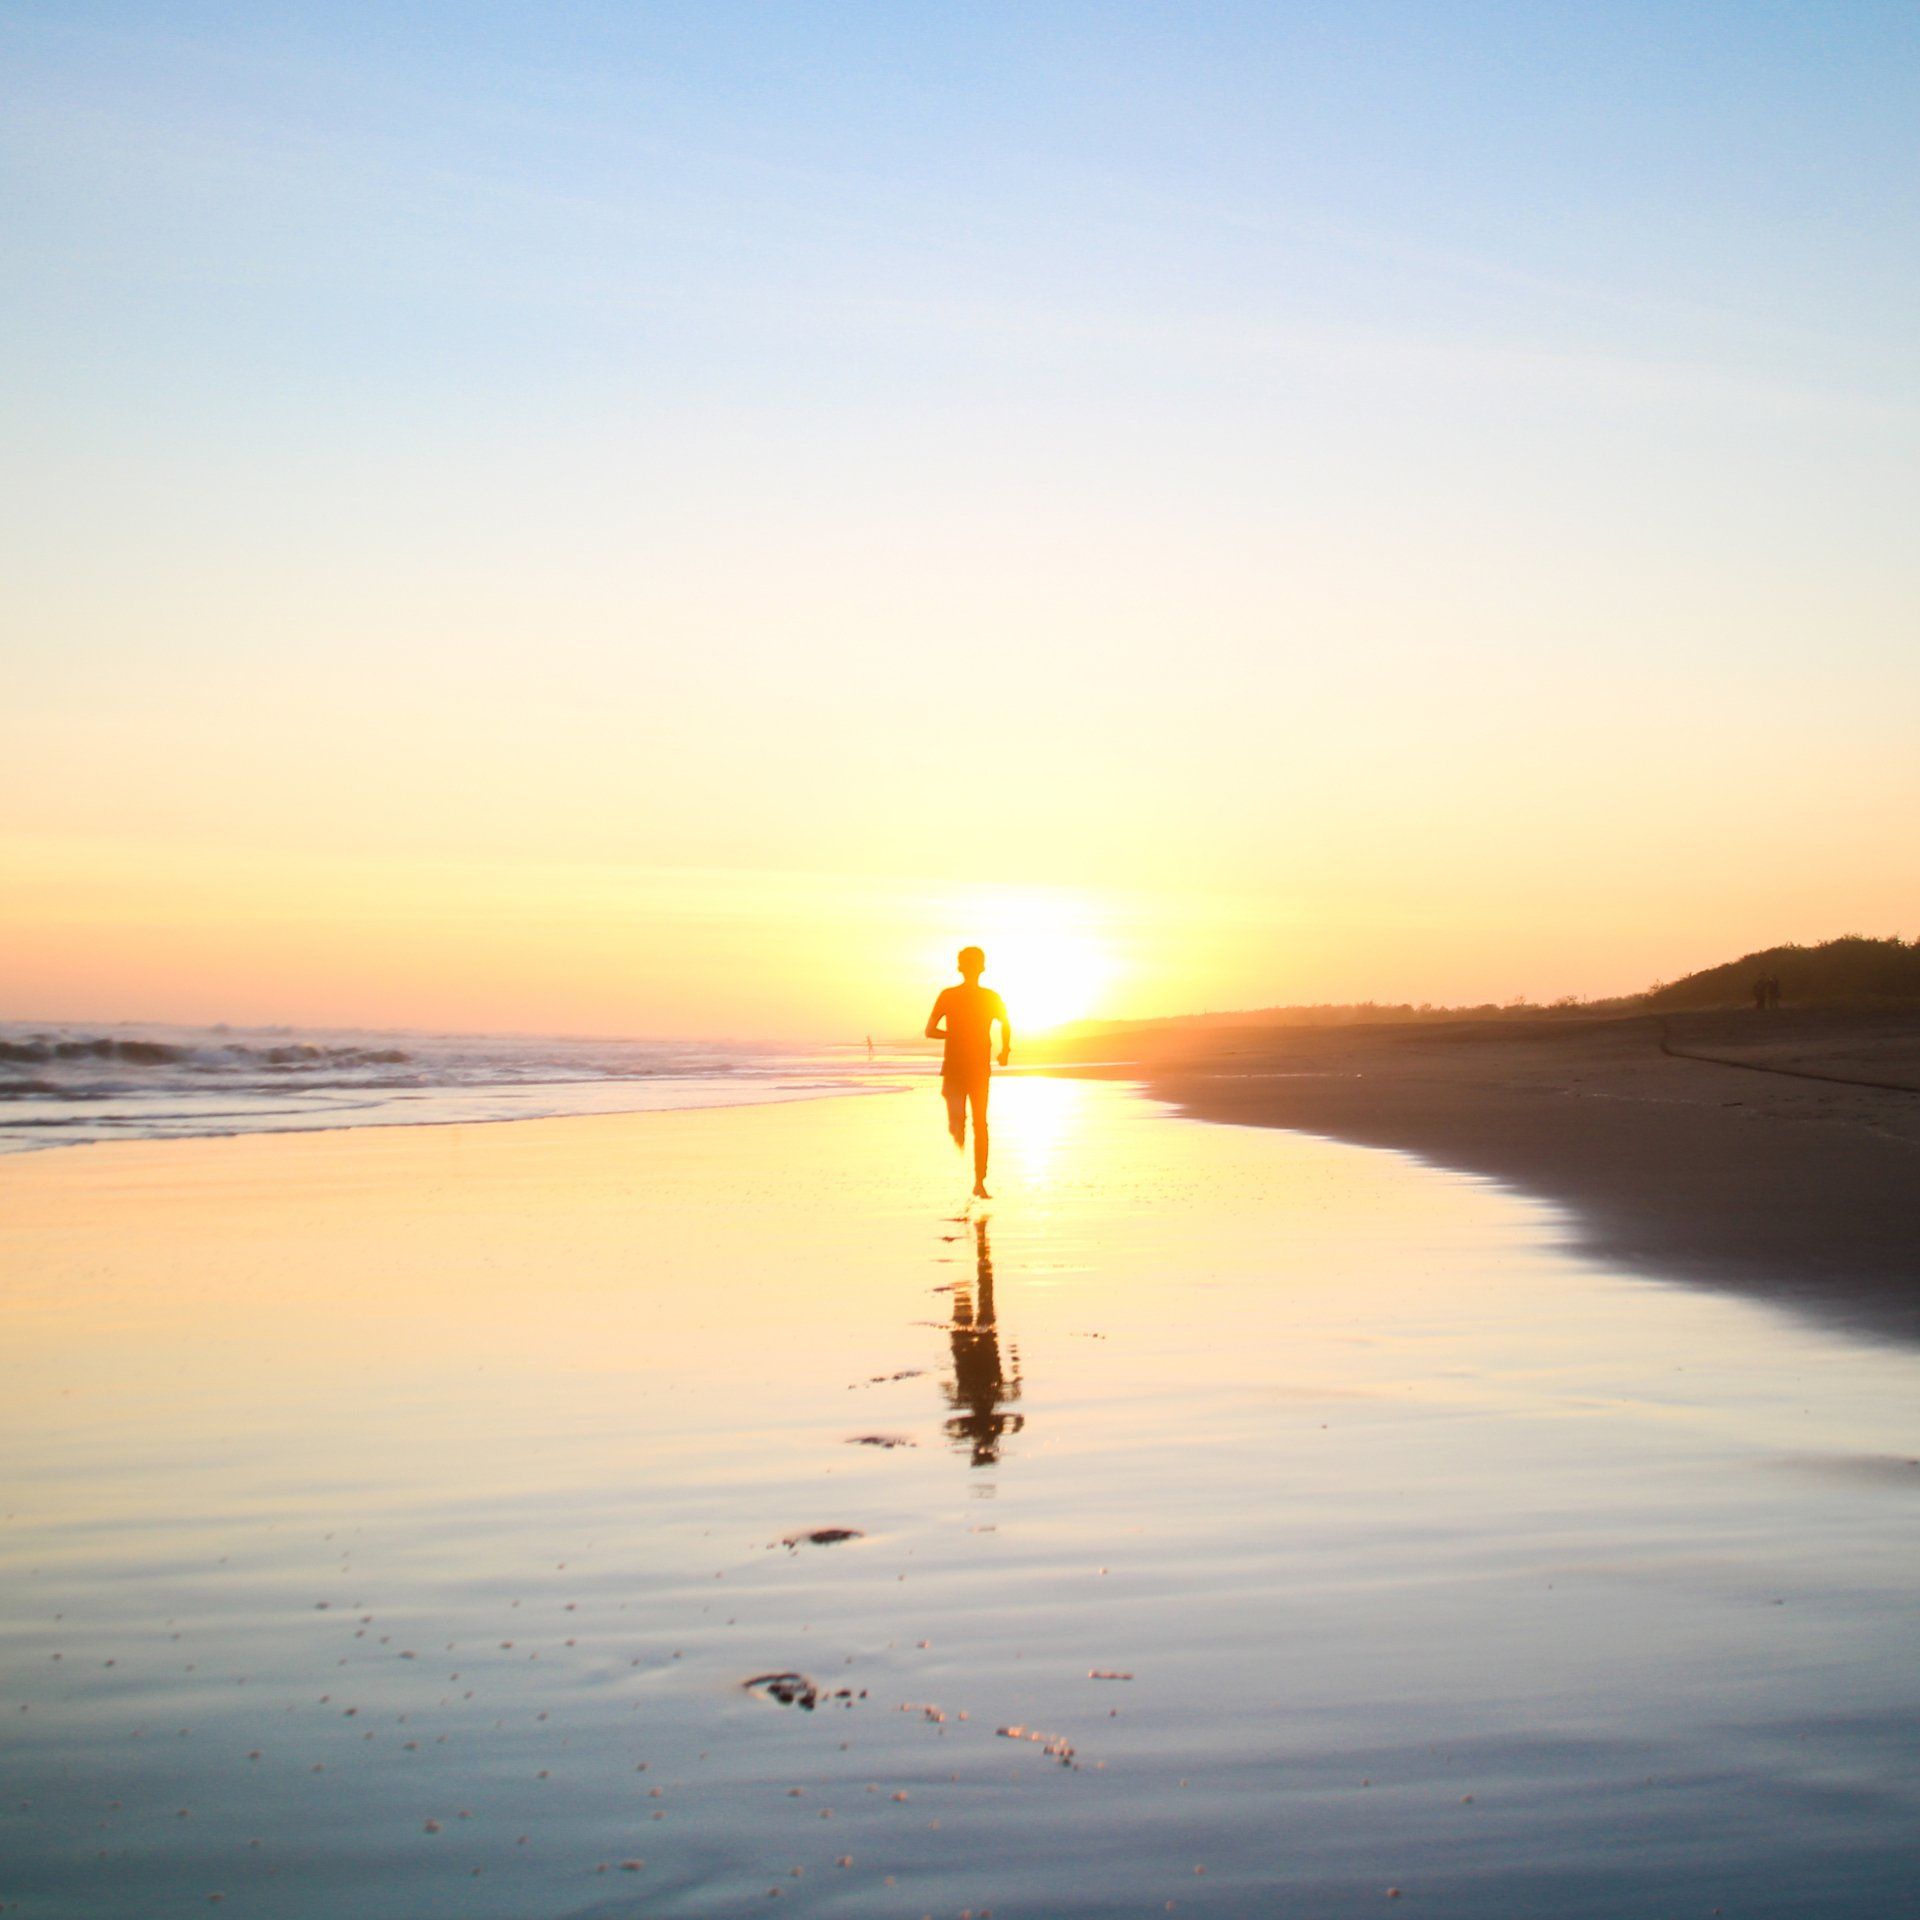 Image shows the silhouette of a person running on the beach at sunset.